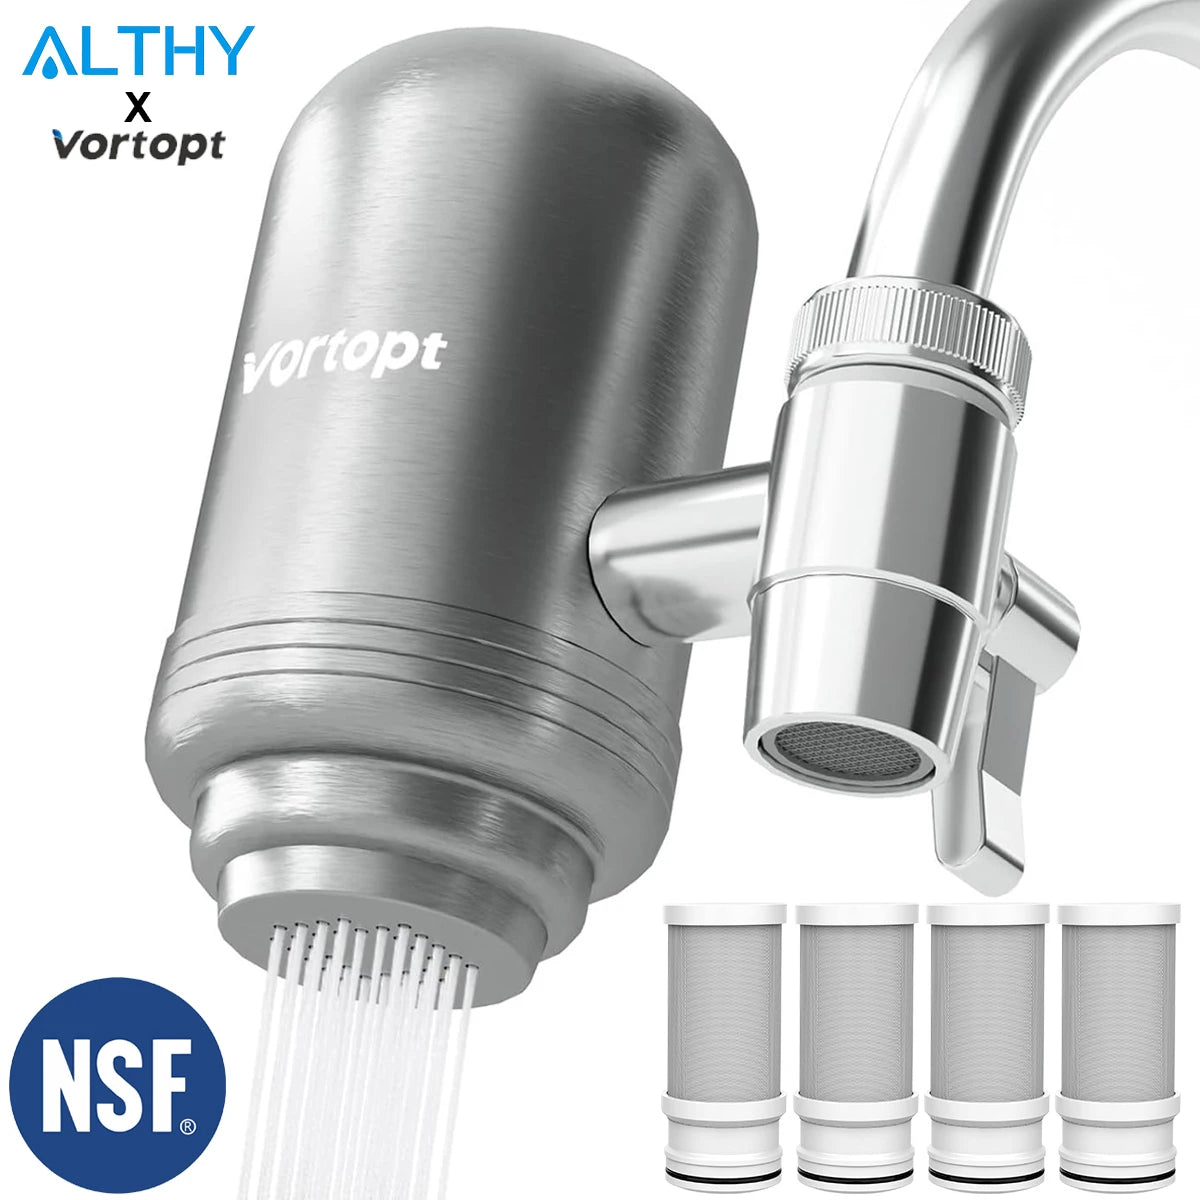 Vortopt Stainless Steel Faucet Tap Water Filter Purifier System, NSF Certified Reduces Lead, Chlorine & Bad Taste Kitchen